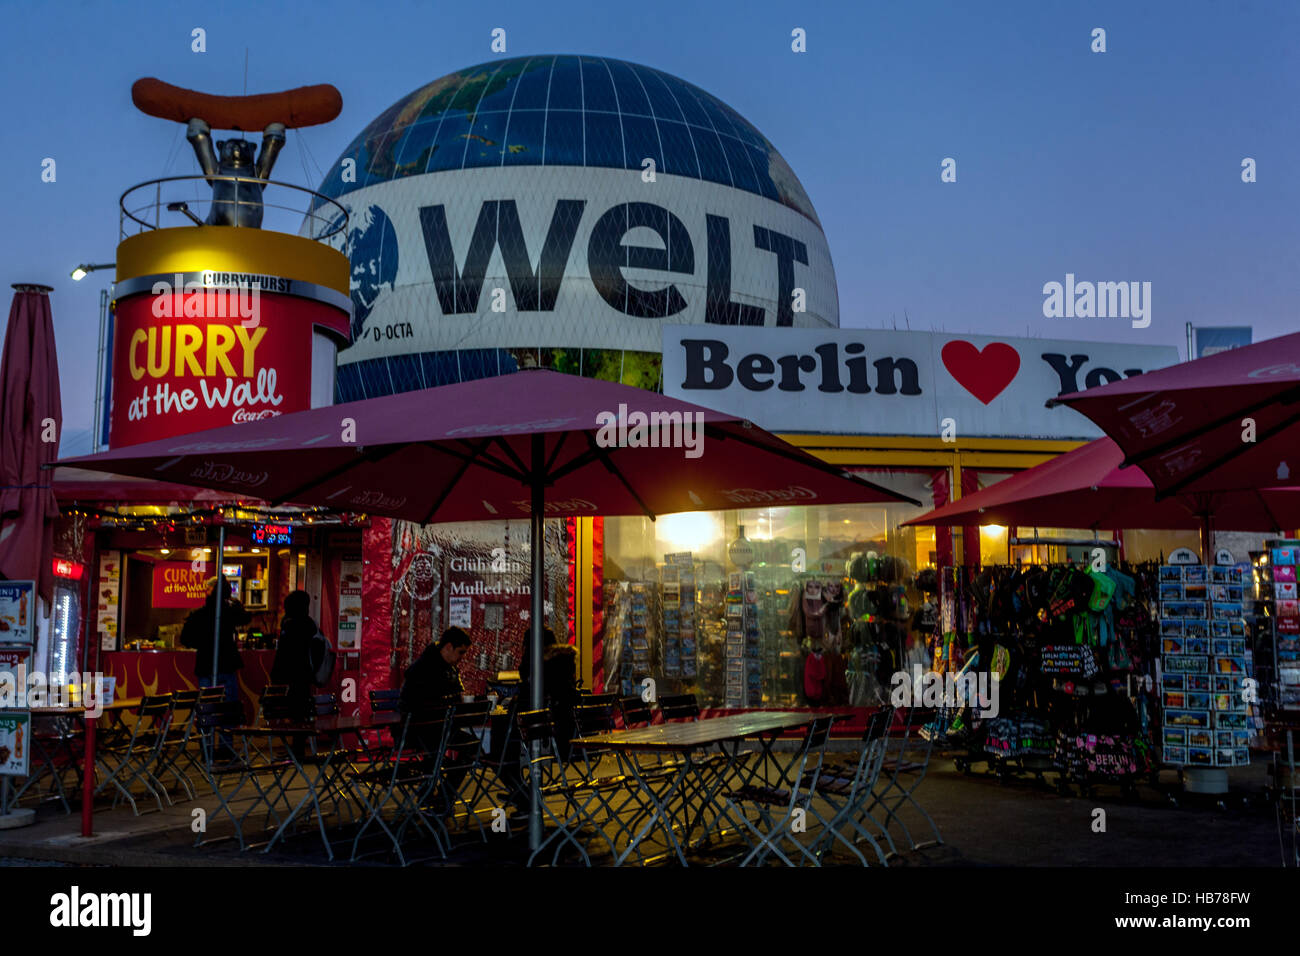 Curry at The Wall, Wurst fast food stall, Berlin, Germany Stock Photo